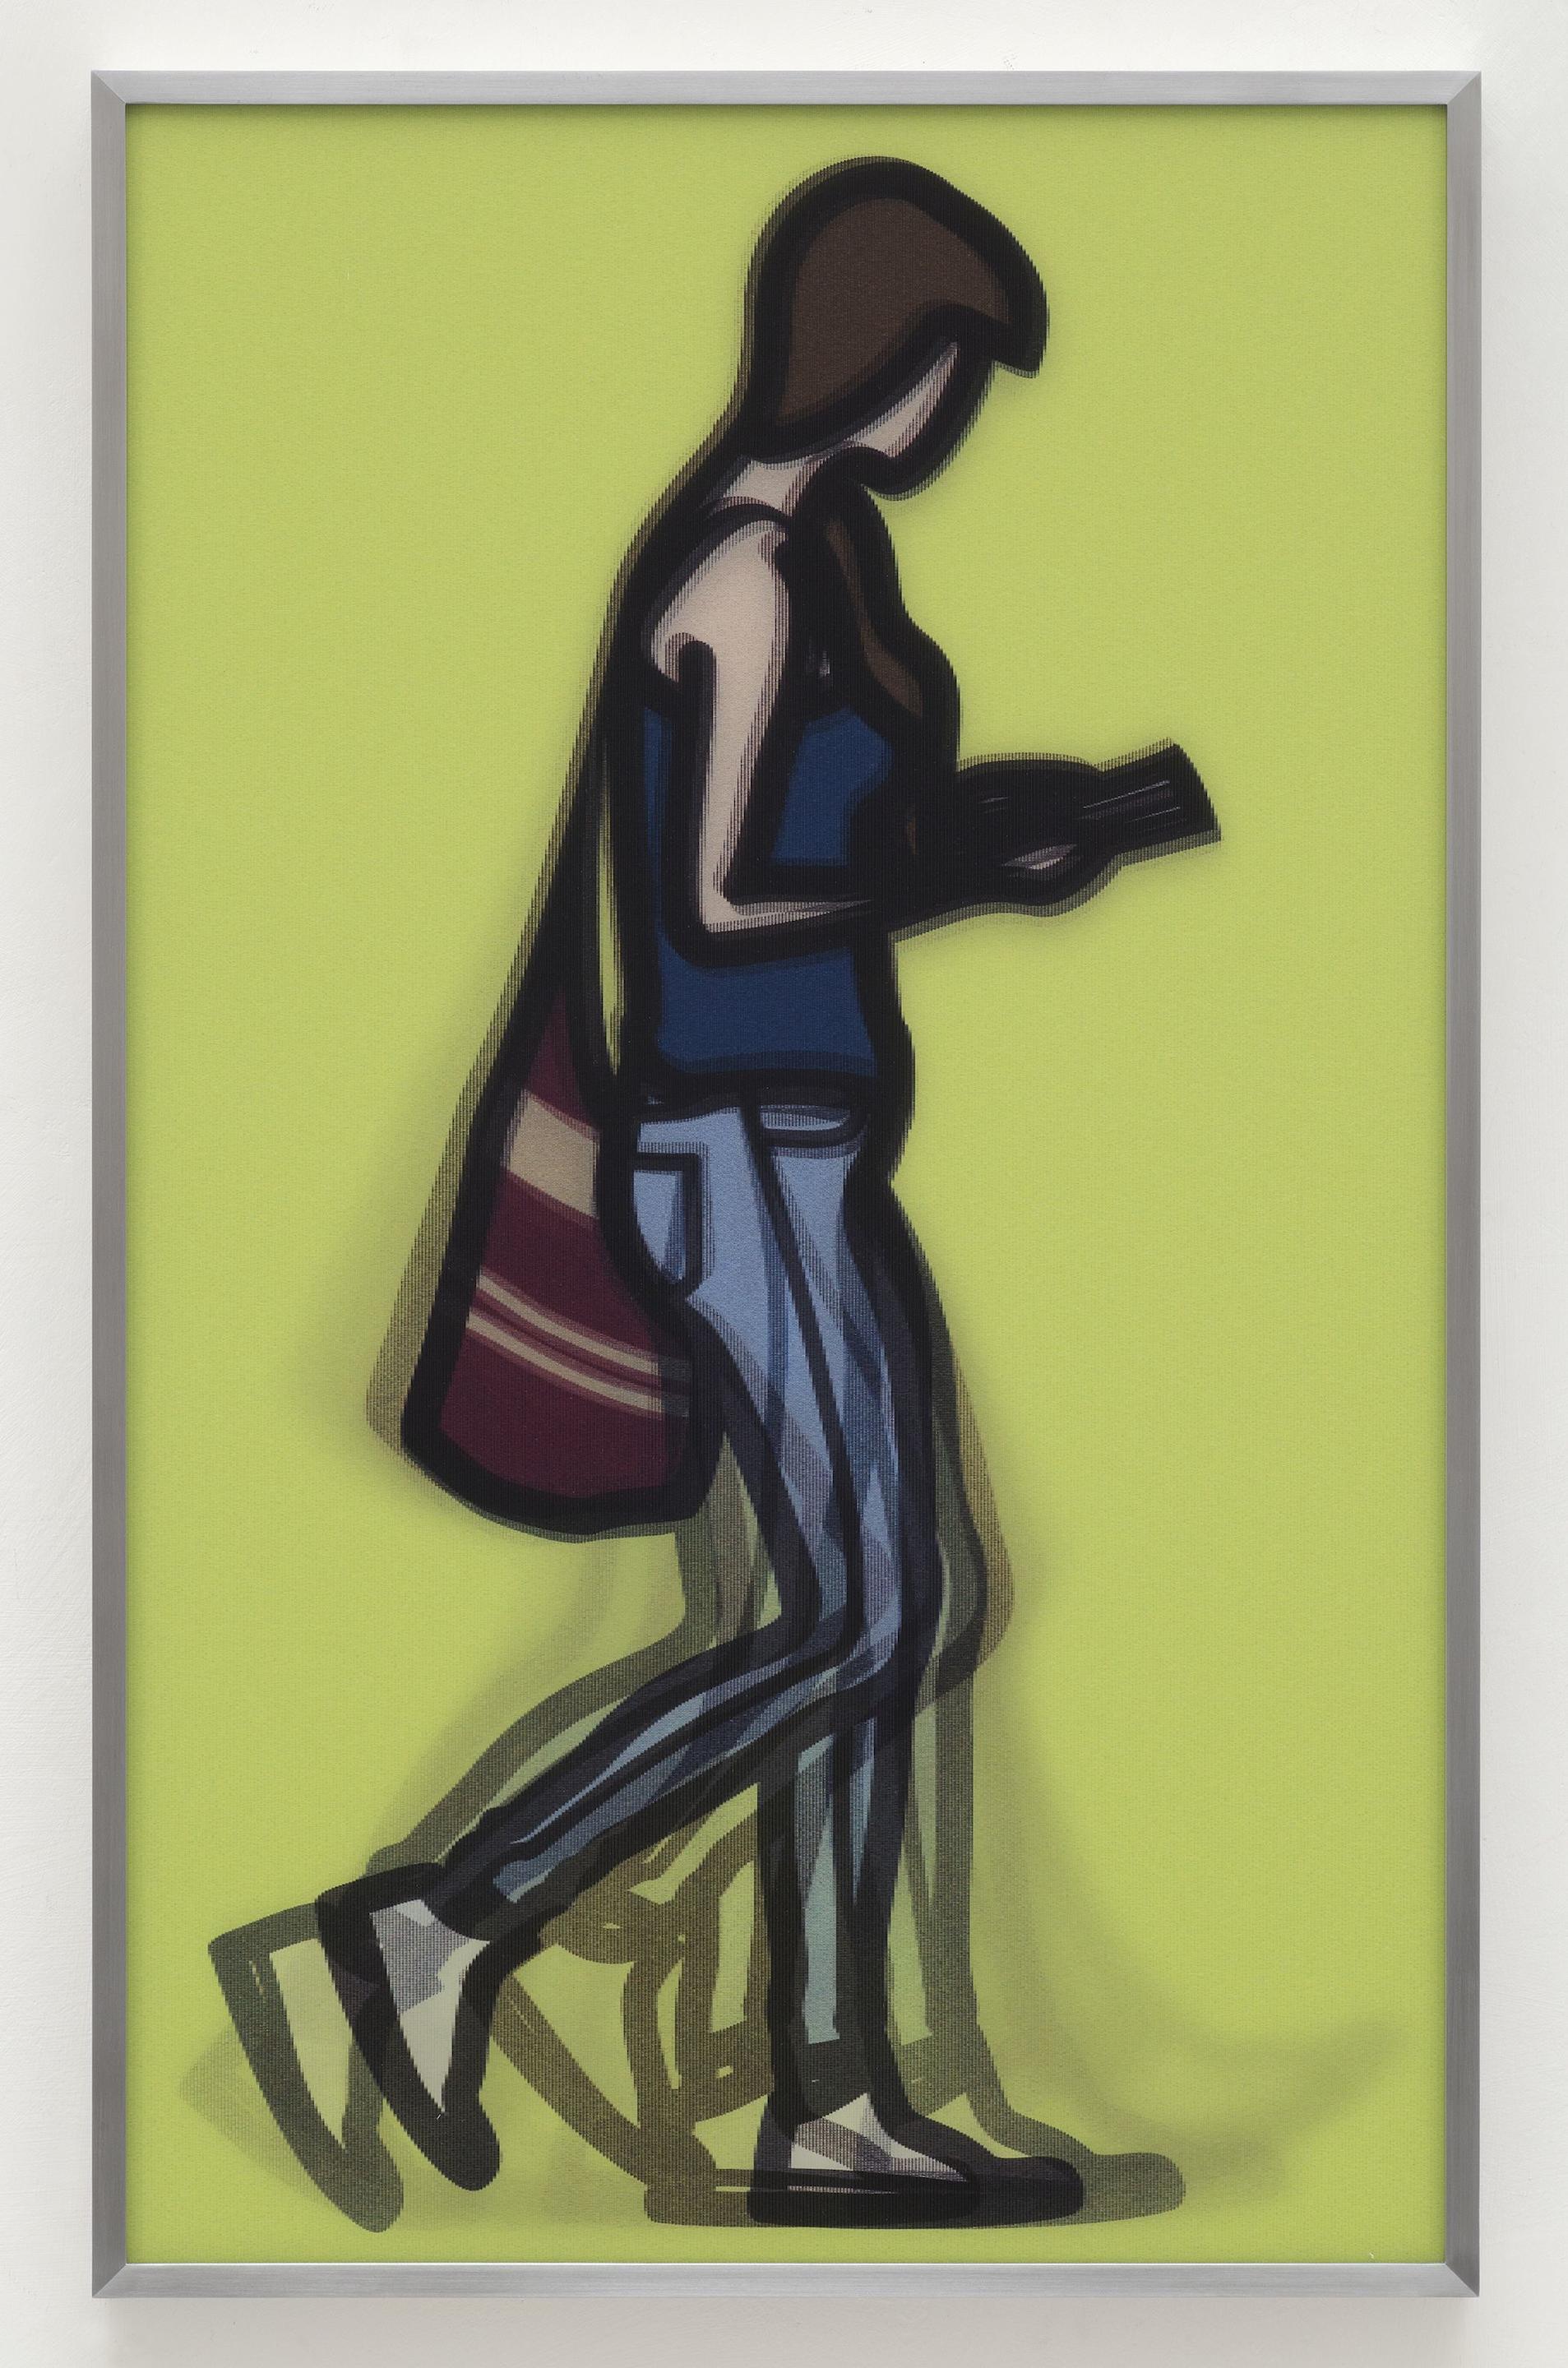 Julian Opie (British, born 1958) Waitress, from 'Walking in London' Inkjet on lenticular acrylic panel, 2014, signed in black ink and inscribed 'AP 4/10' on a label affixed verso, one of ten artist's proof aside the numbered edition of 50, published by Cristea Roberts Gallery, London, in the artist's designated brushed aluminium frame, 830 x 510 x 40mm (32 5/8 x 20 1/8 x 1 5/8in)(overall)